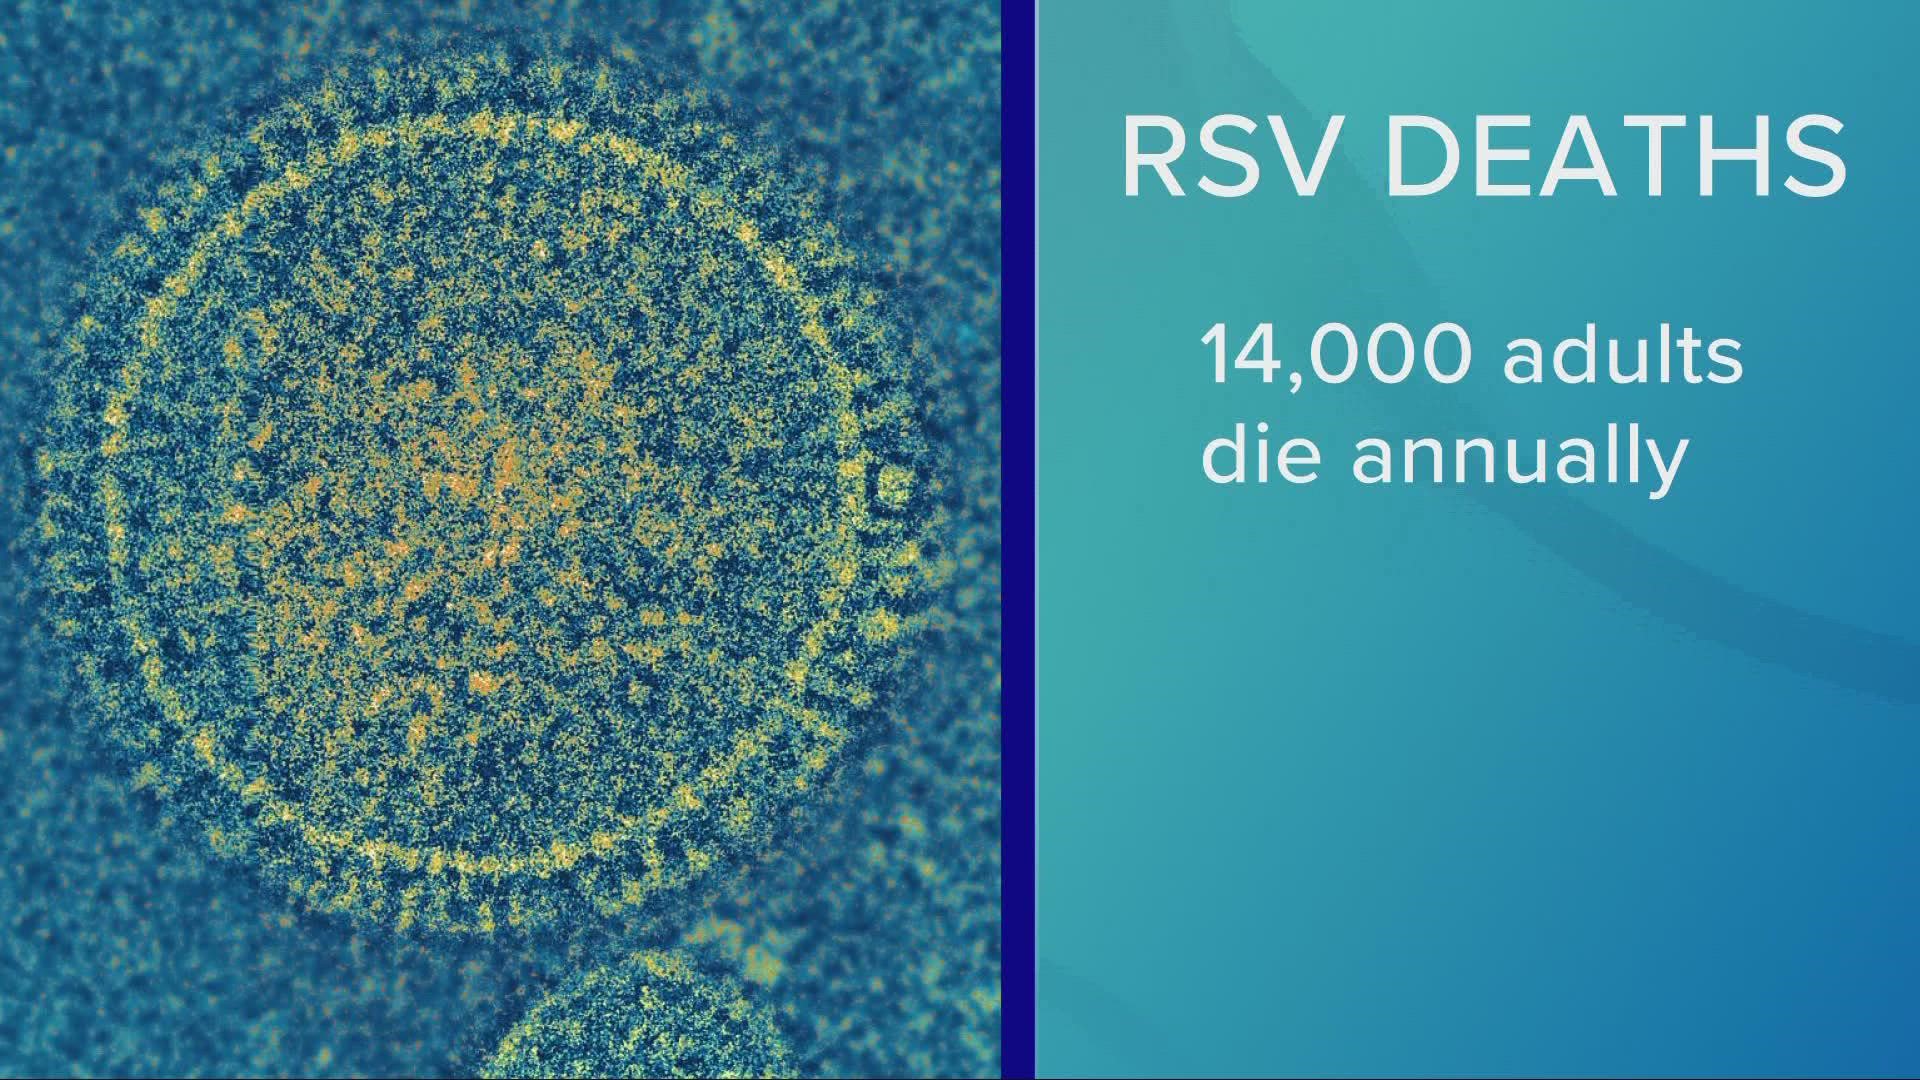 While RSV deaths for children are rare, over 14,000 adults die every year from the virus.